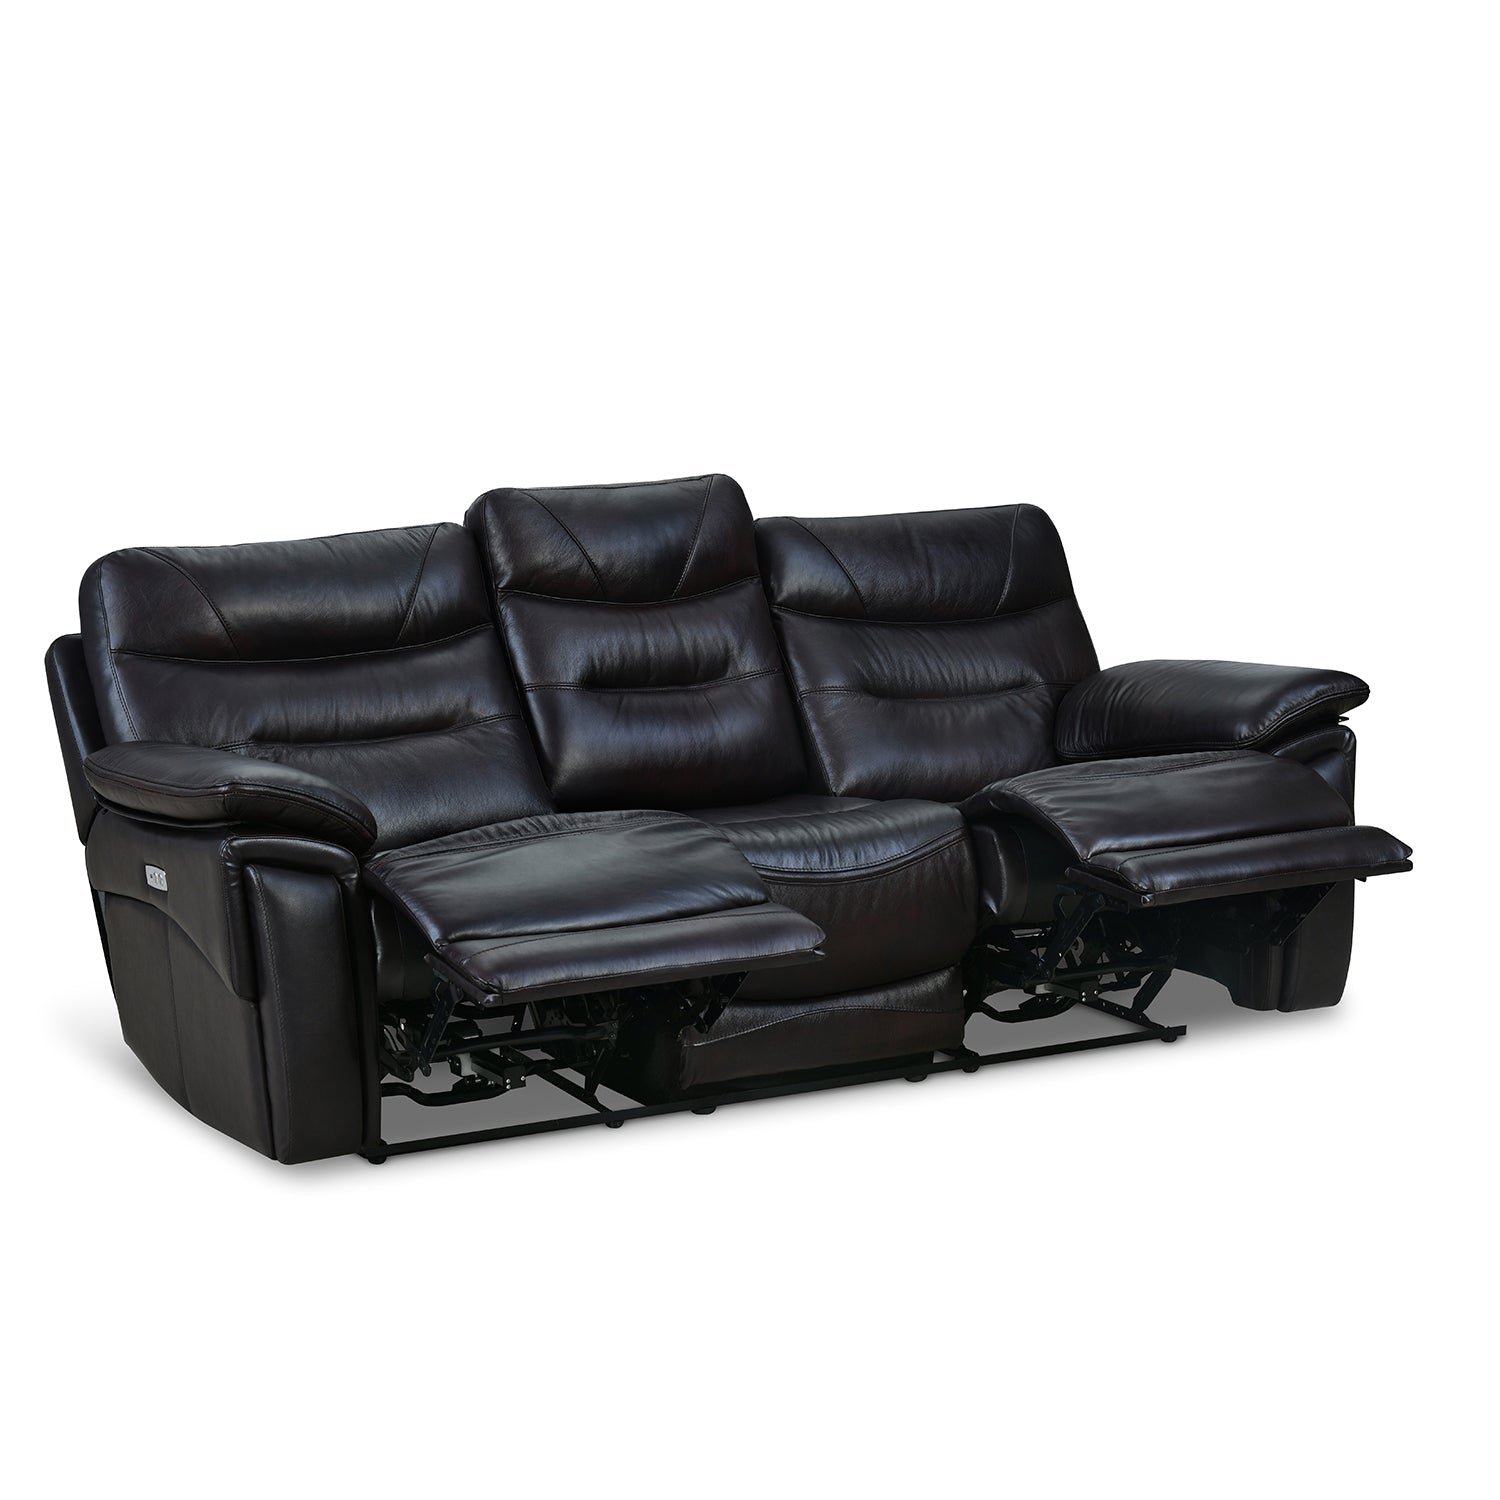 Bakewell 3 Seater Leather Powered Recliner (Brown)